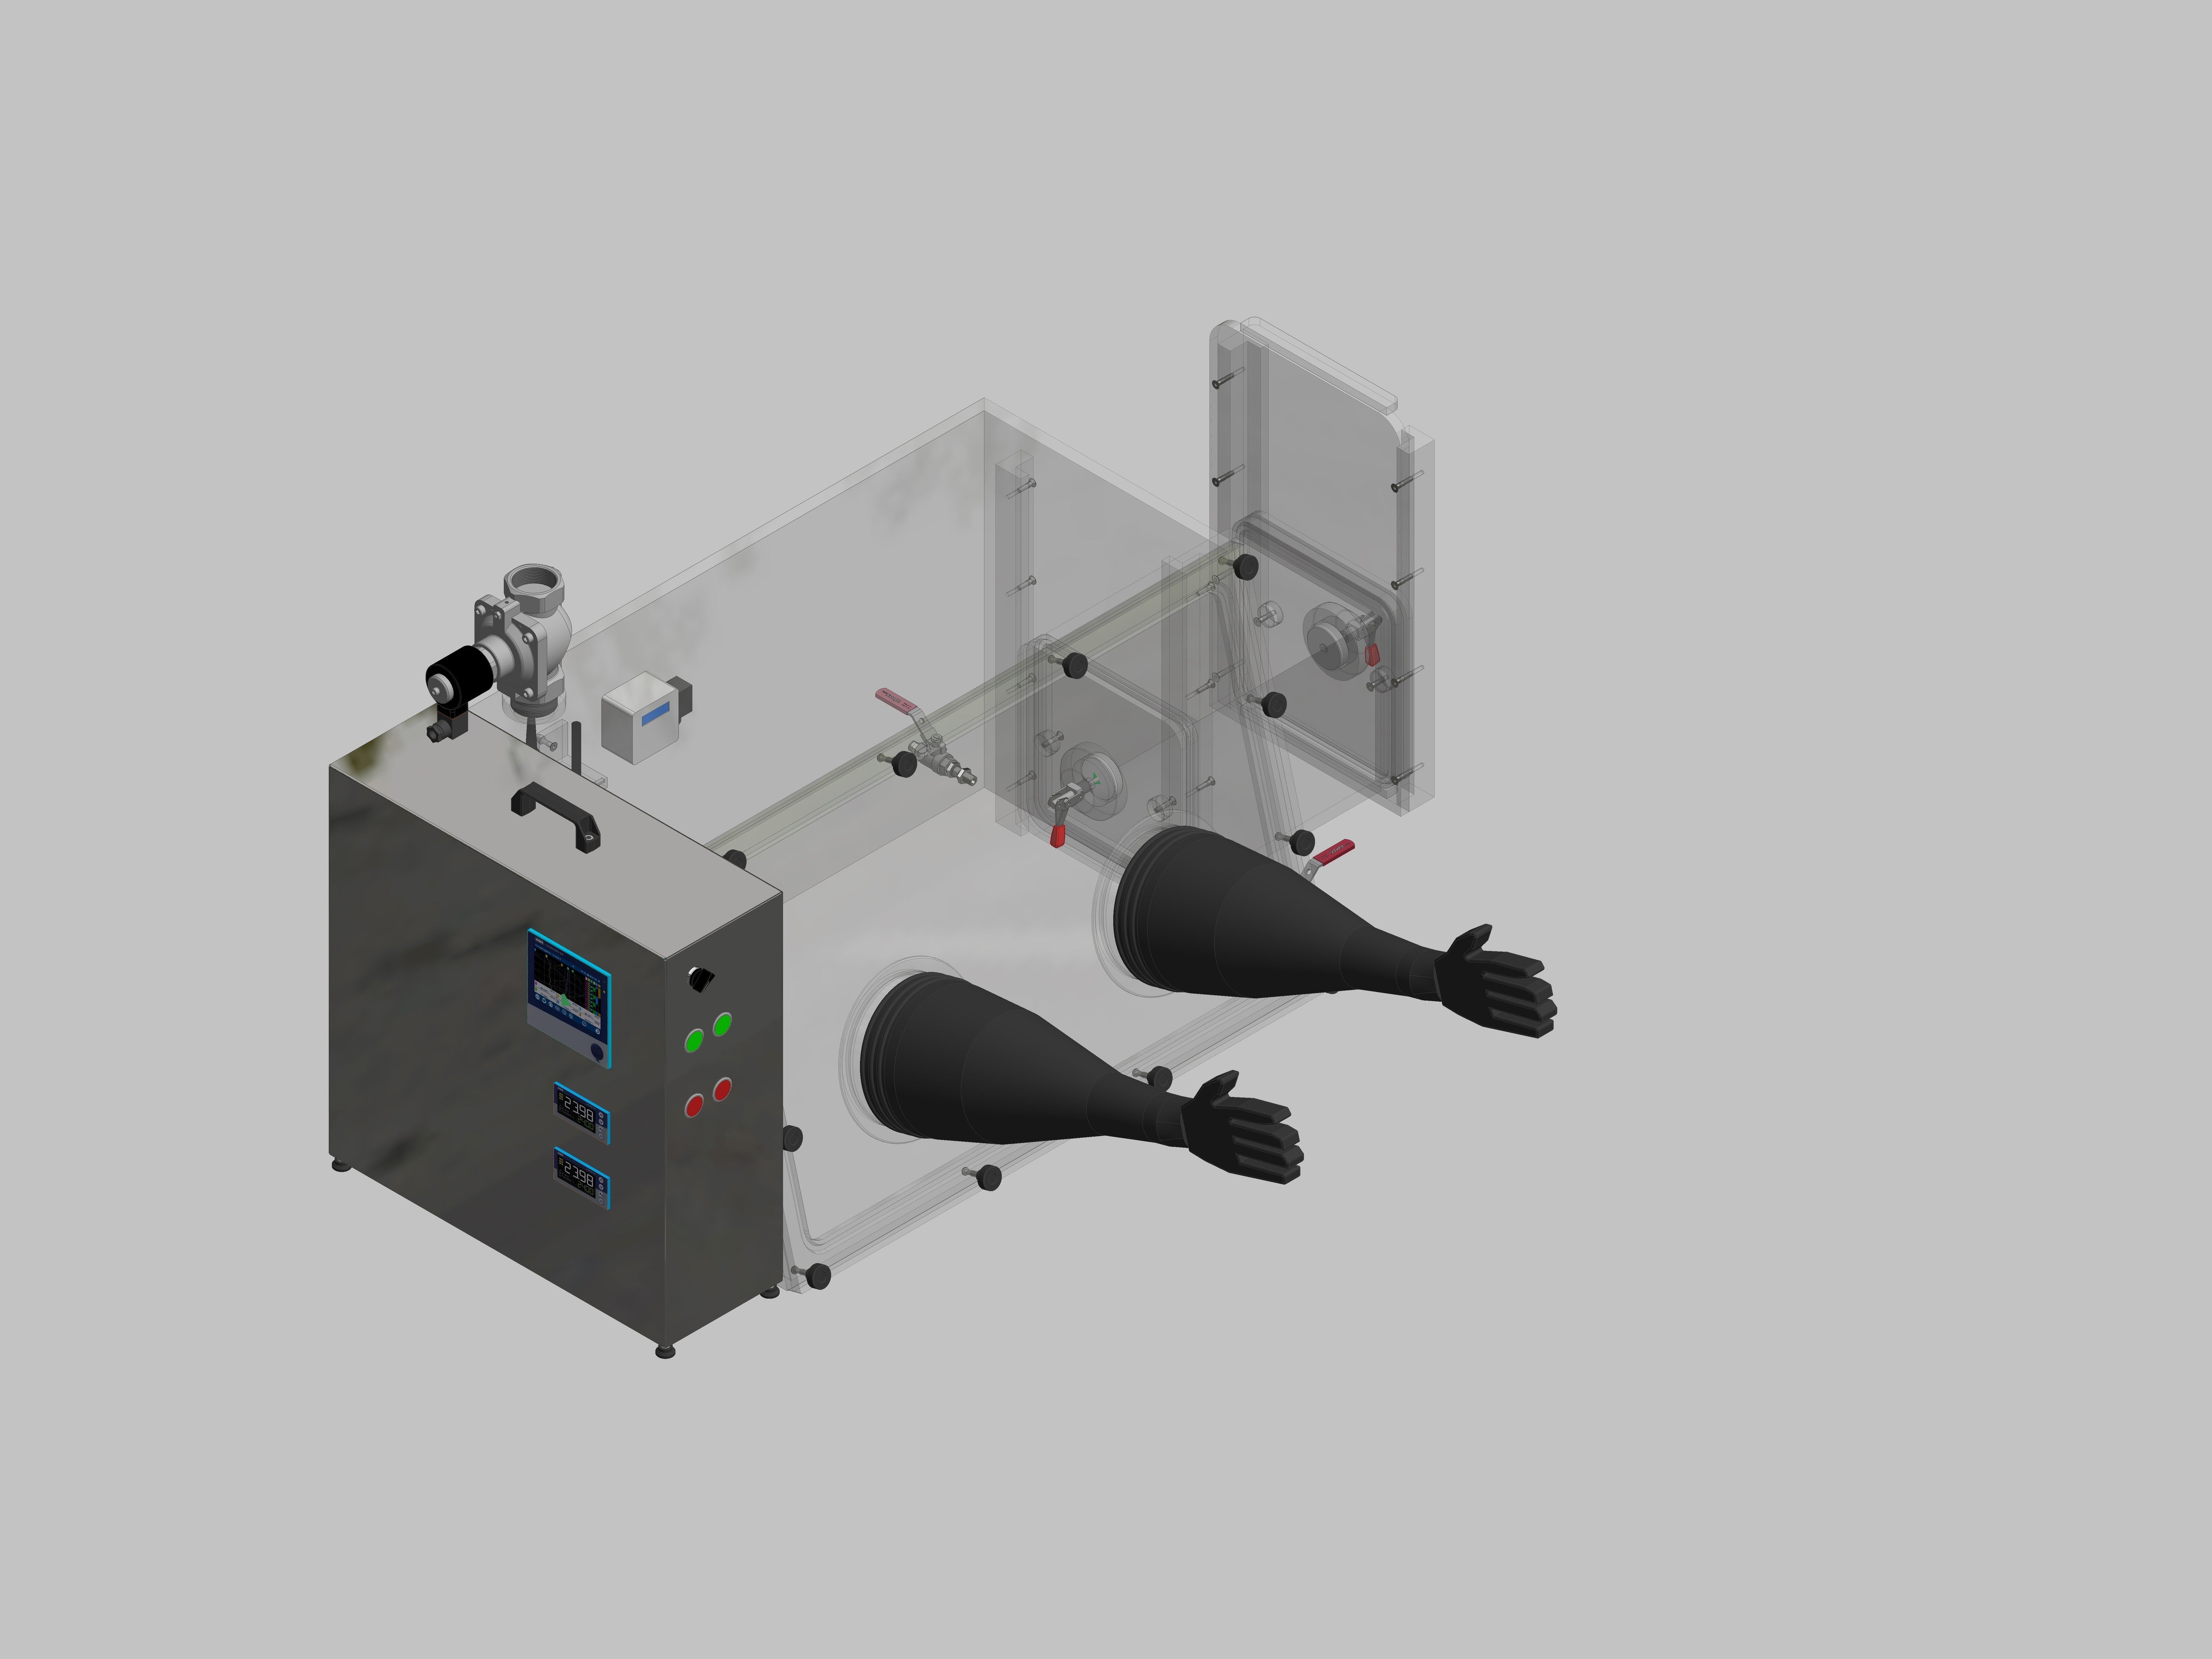 Glovebox made of acrylic &gt; Gas filling: automatic flushing with pressure control, front design: removable, side design: rectangular lock control: humidity regulator and oxygen display with data logger